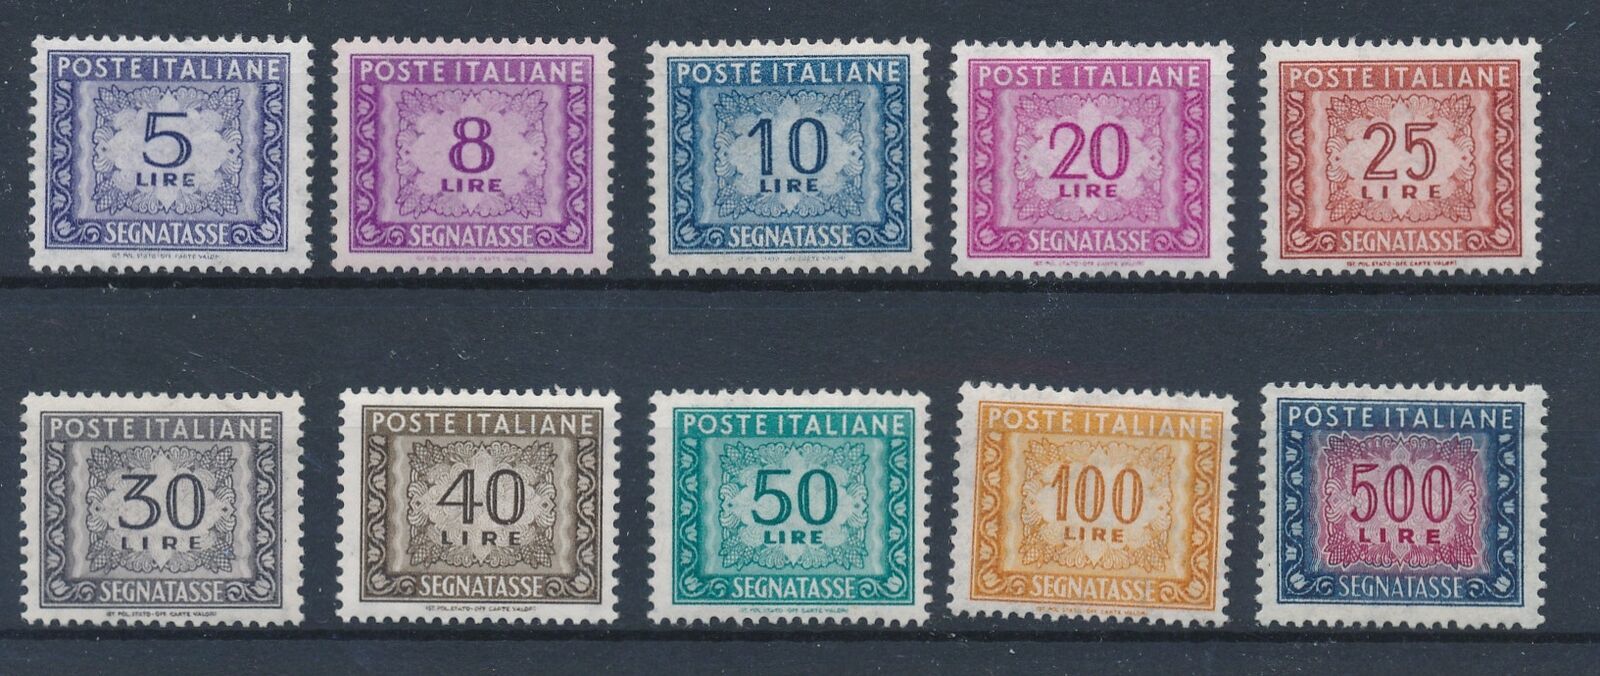 56052 Italy Due 195556 Very good set MNH VF stamps 250